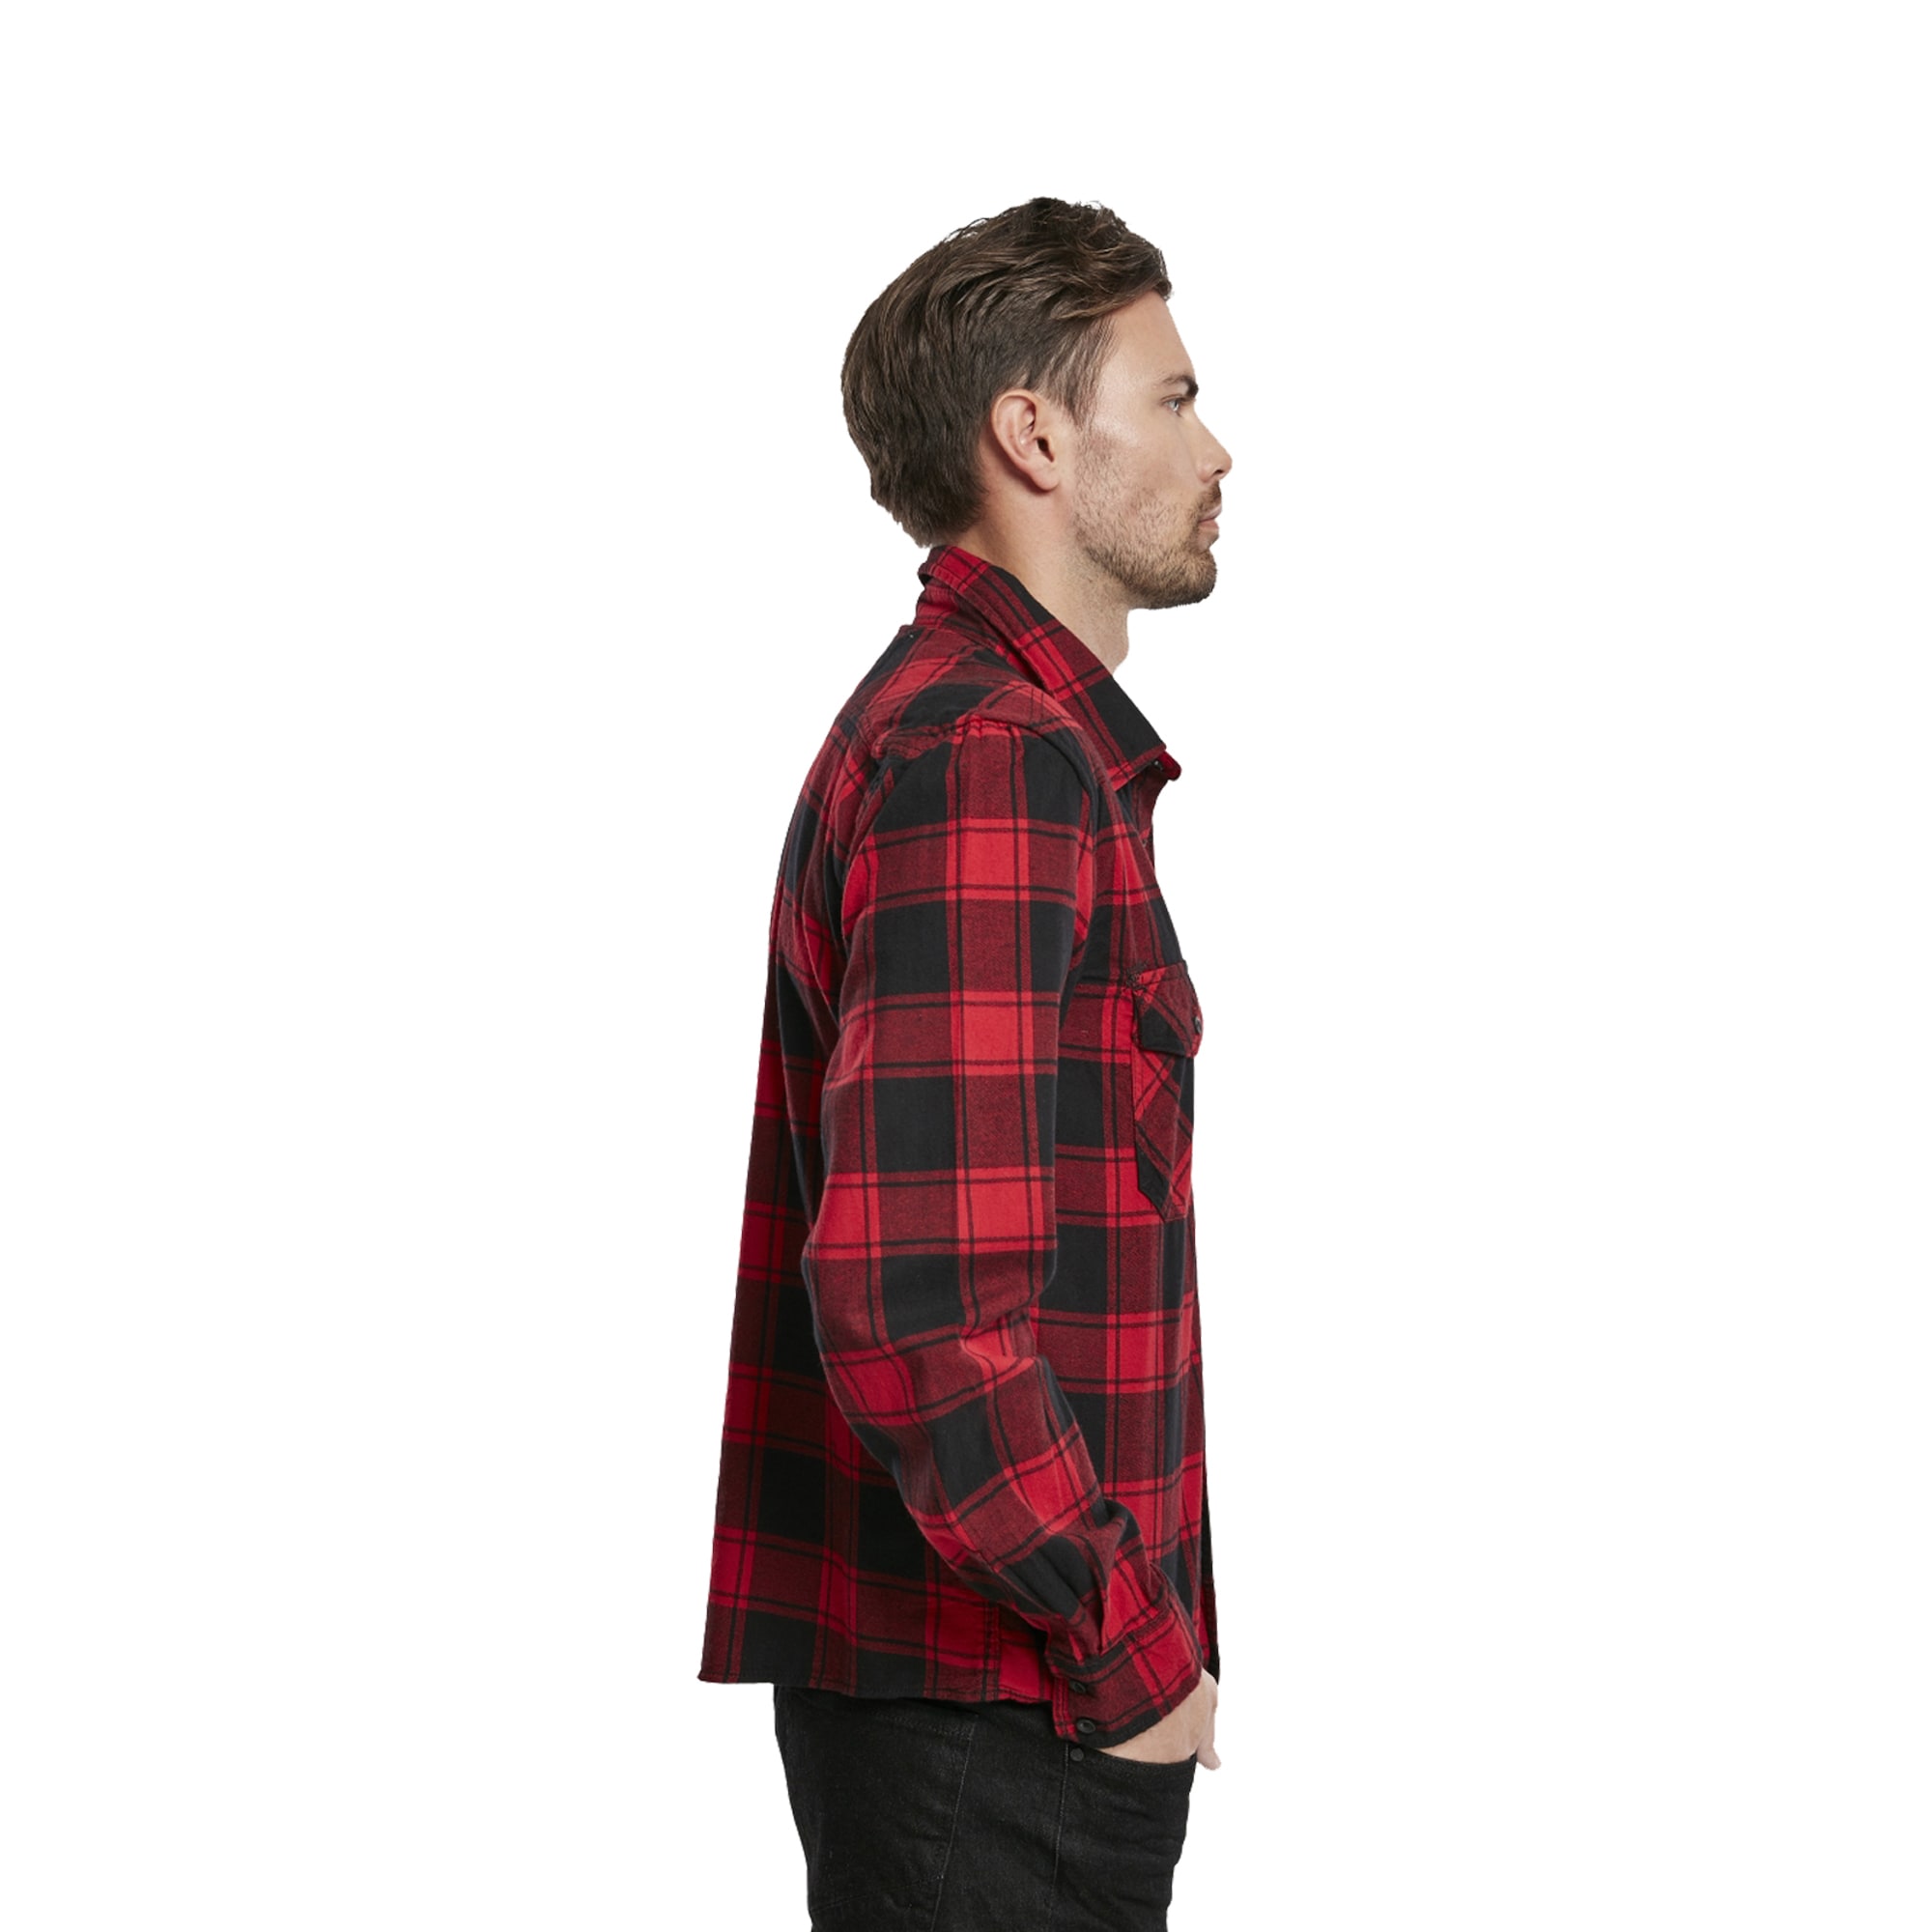 Purchase the Brandit Check Shirt black red by ASMC